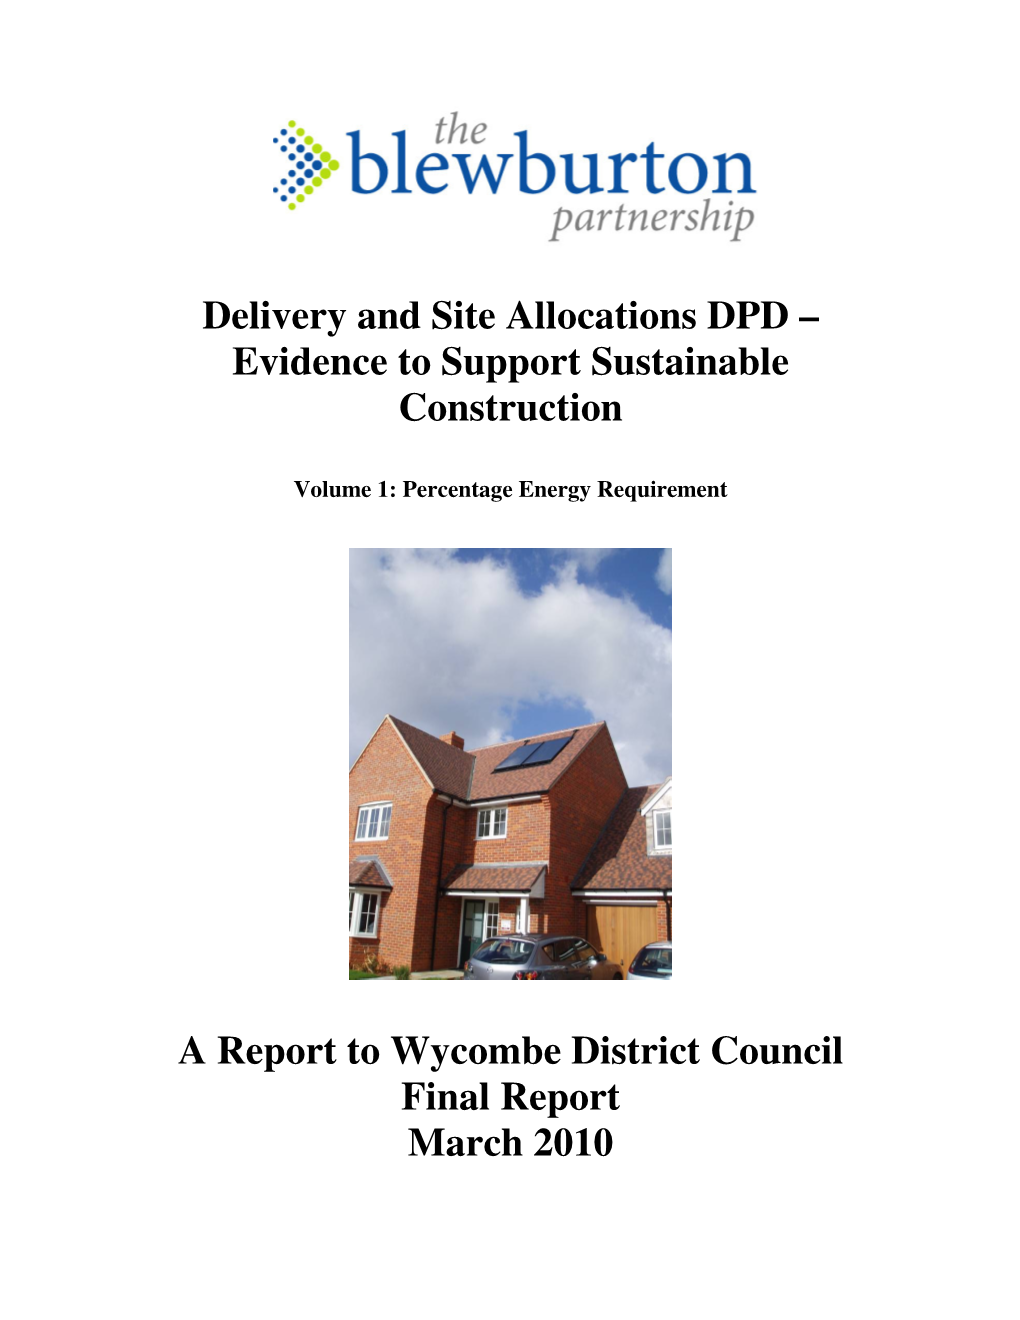 Evidence to Support Sustainable Construction a Report to Wycombe